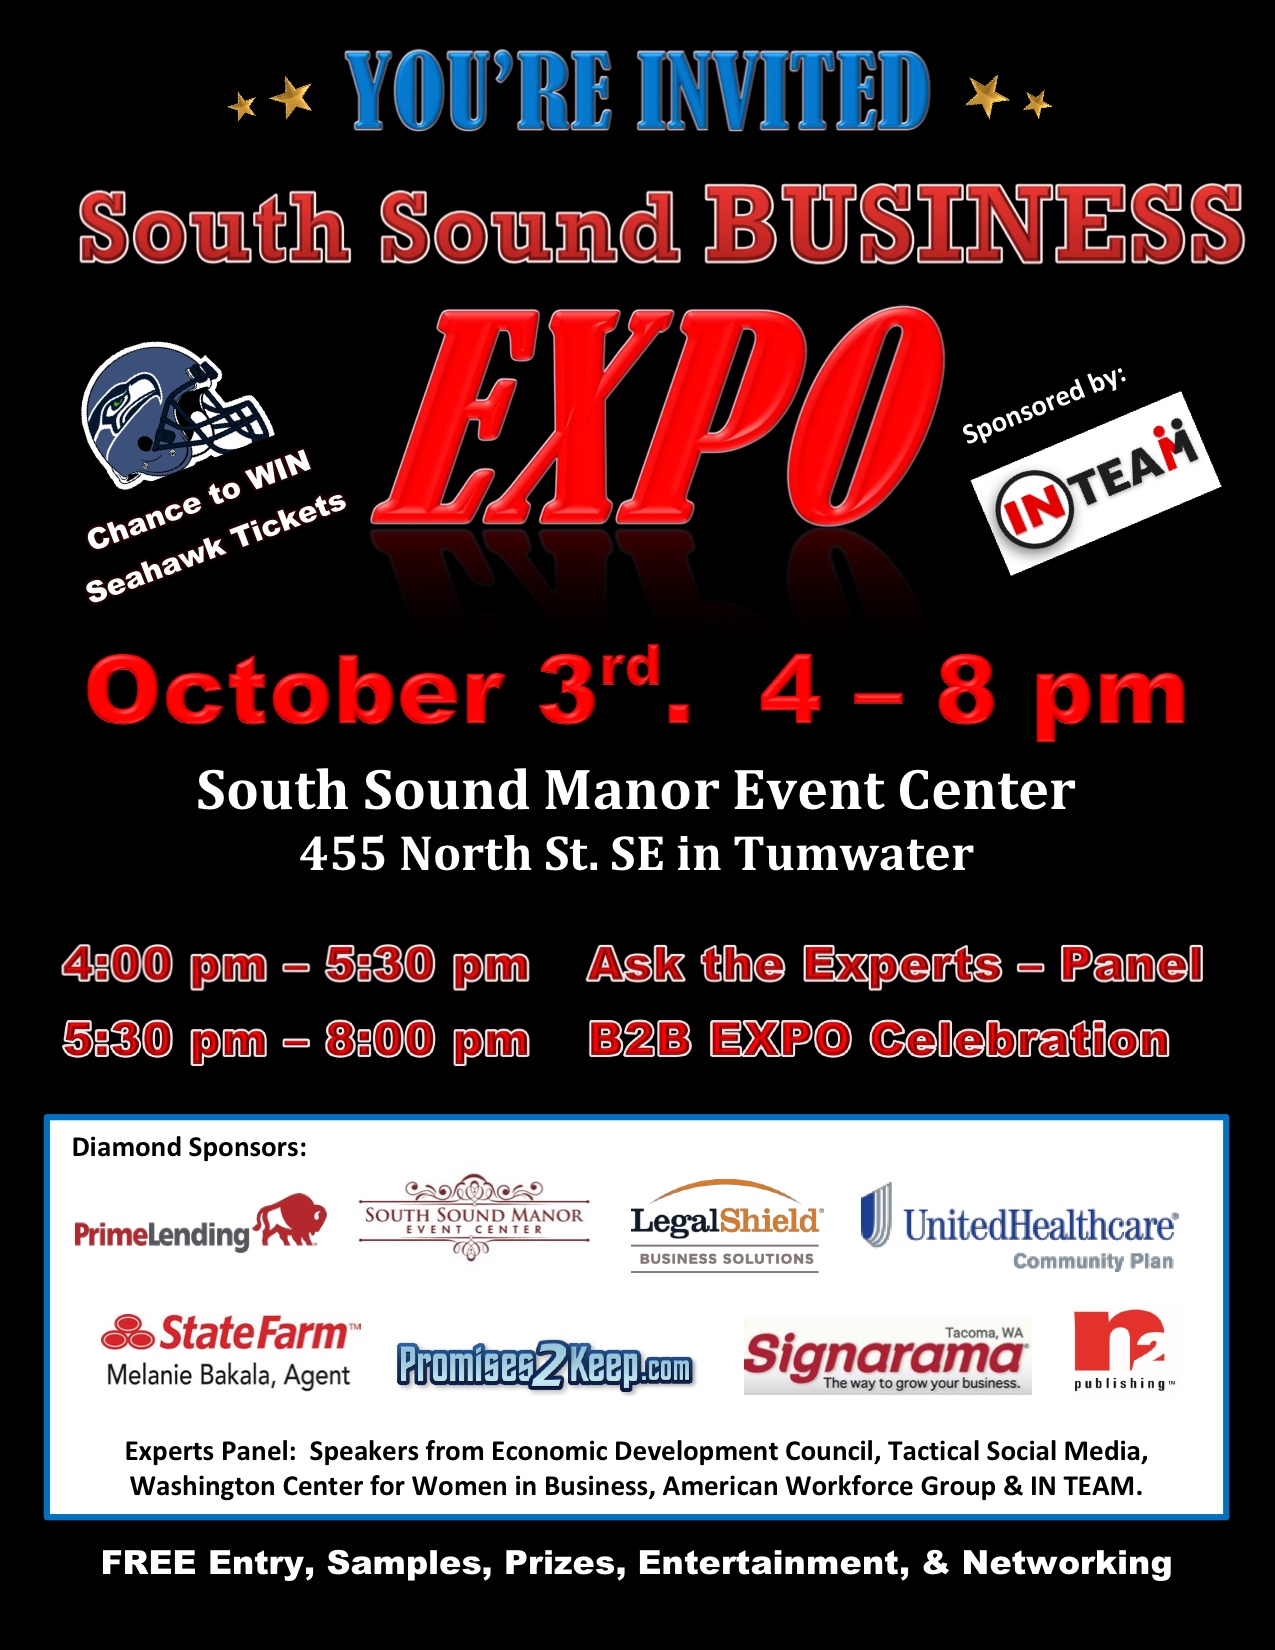 South Sound Business Expo